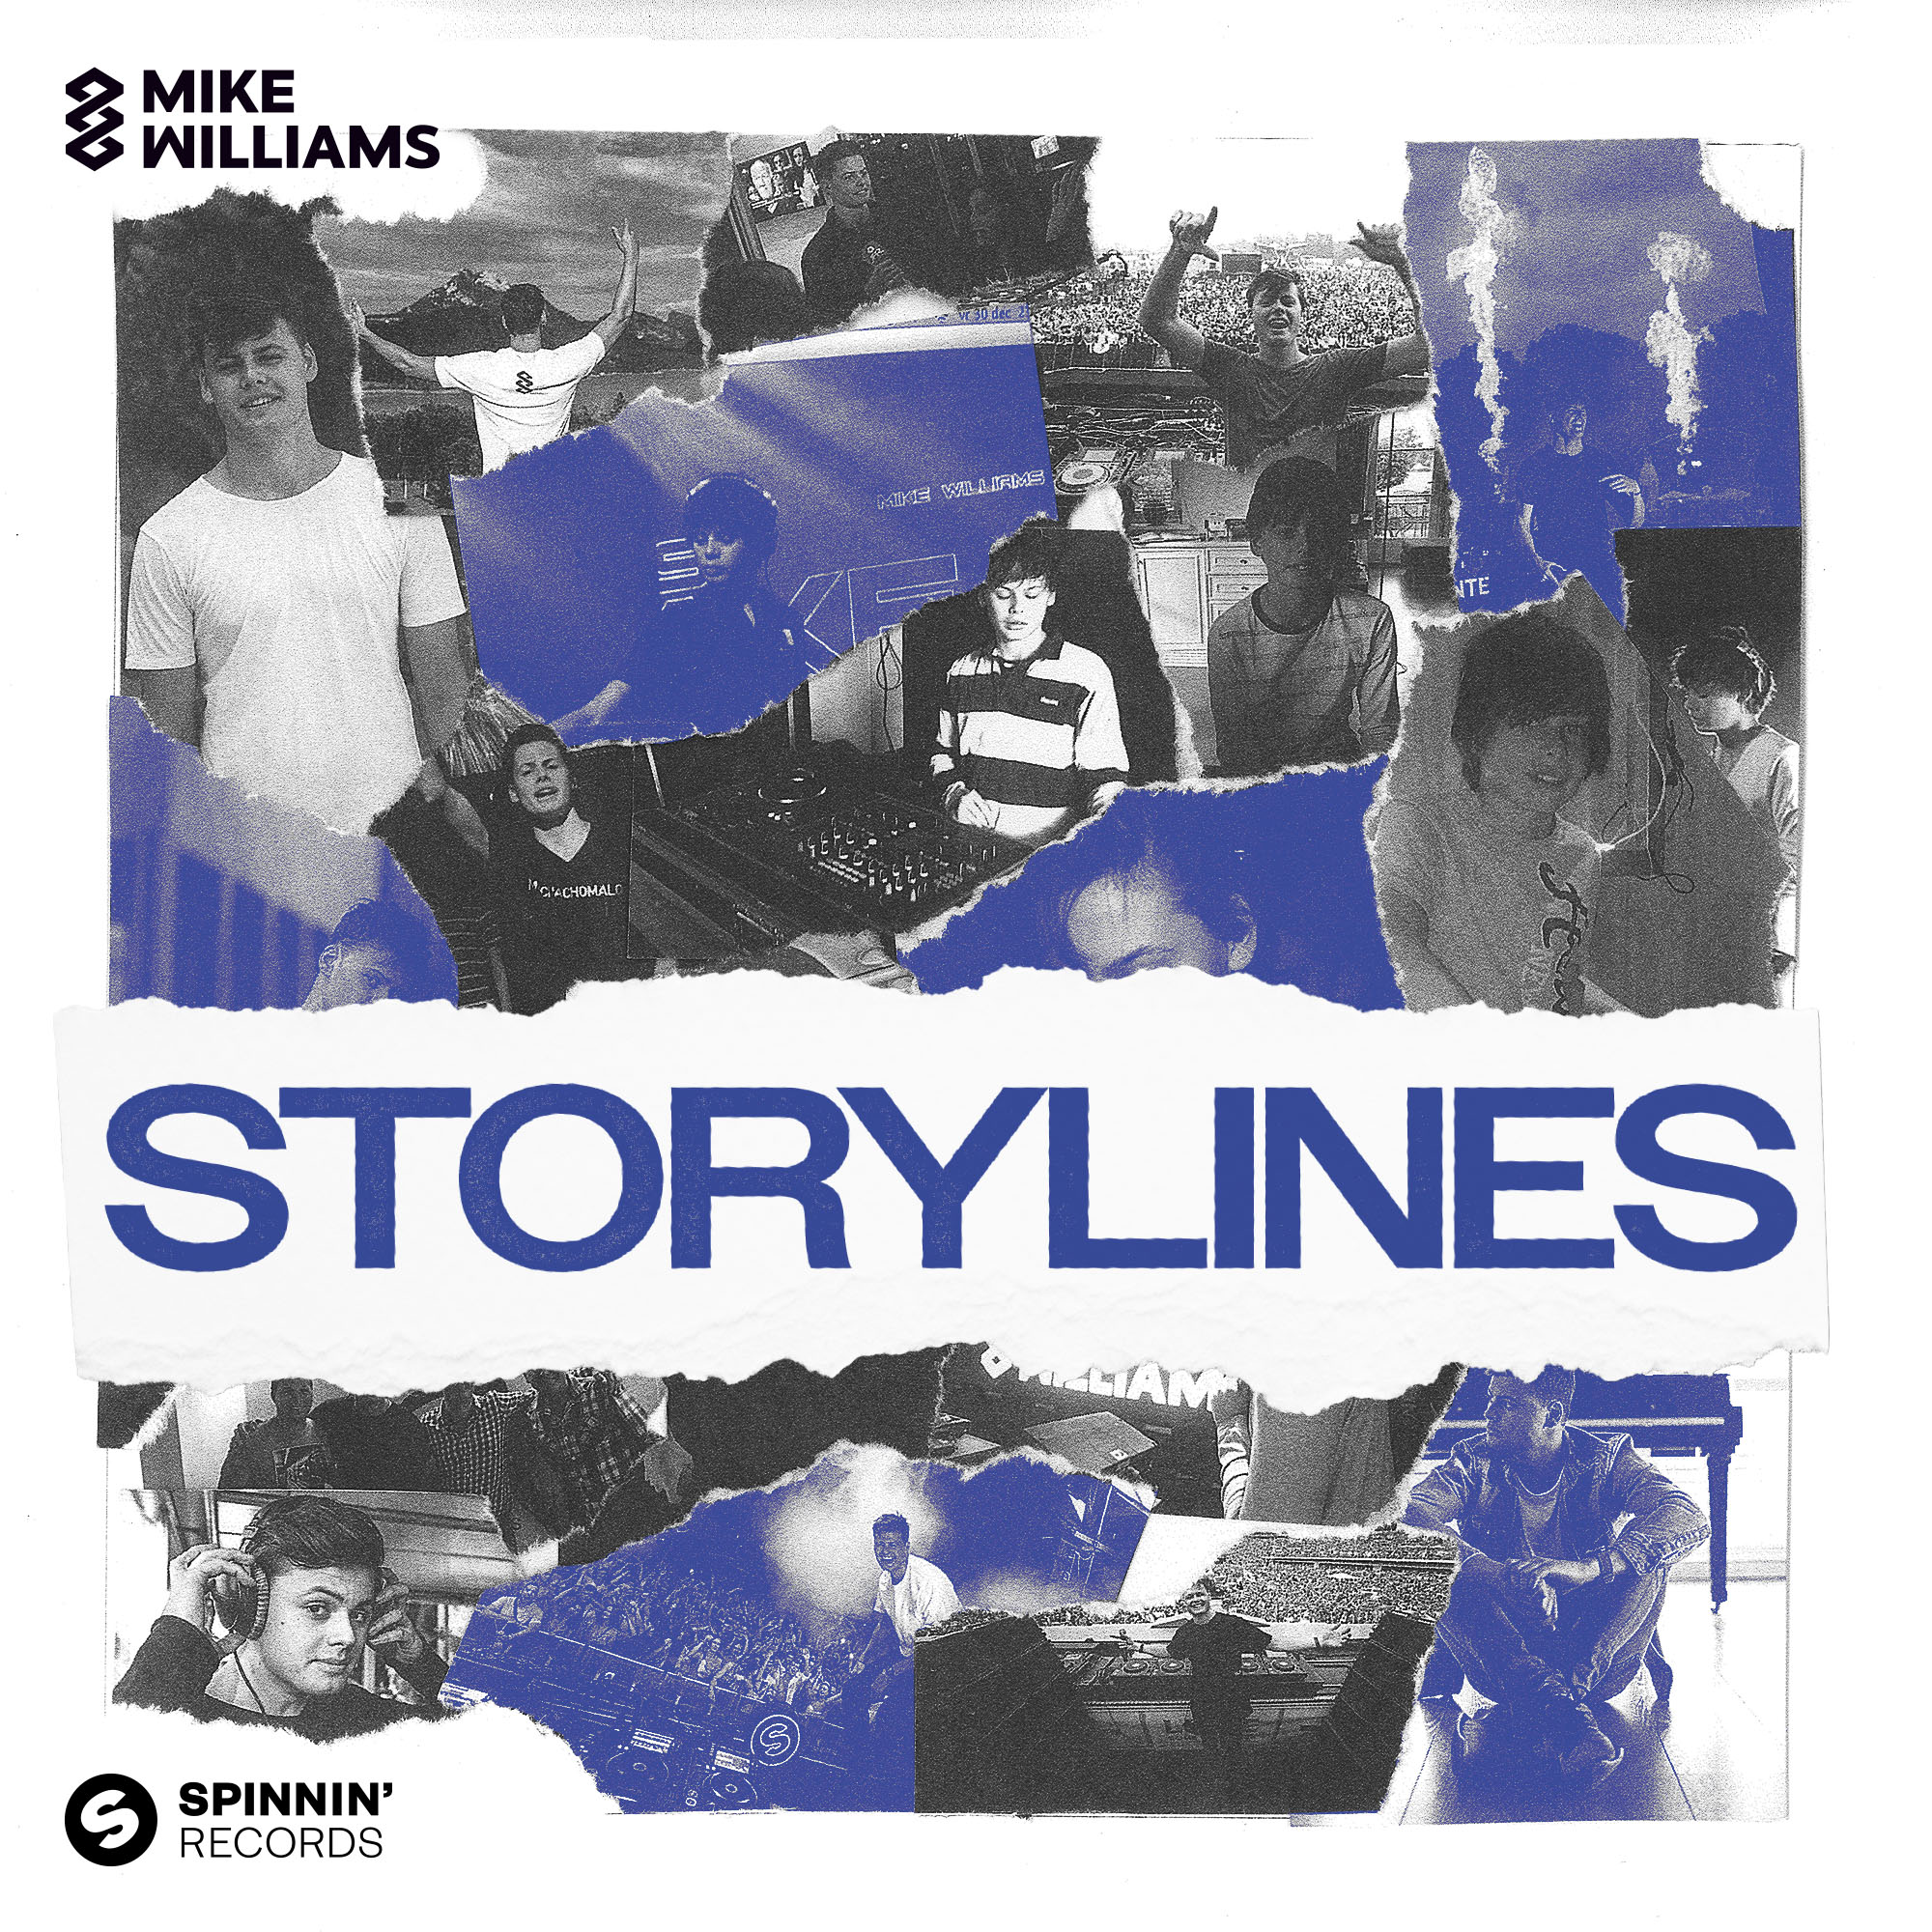 Mike Williams Storylines cover artwork